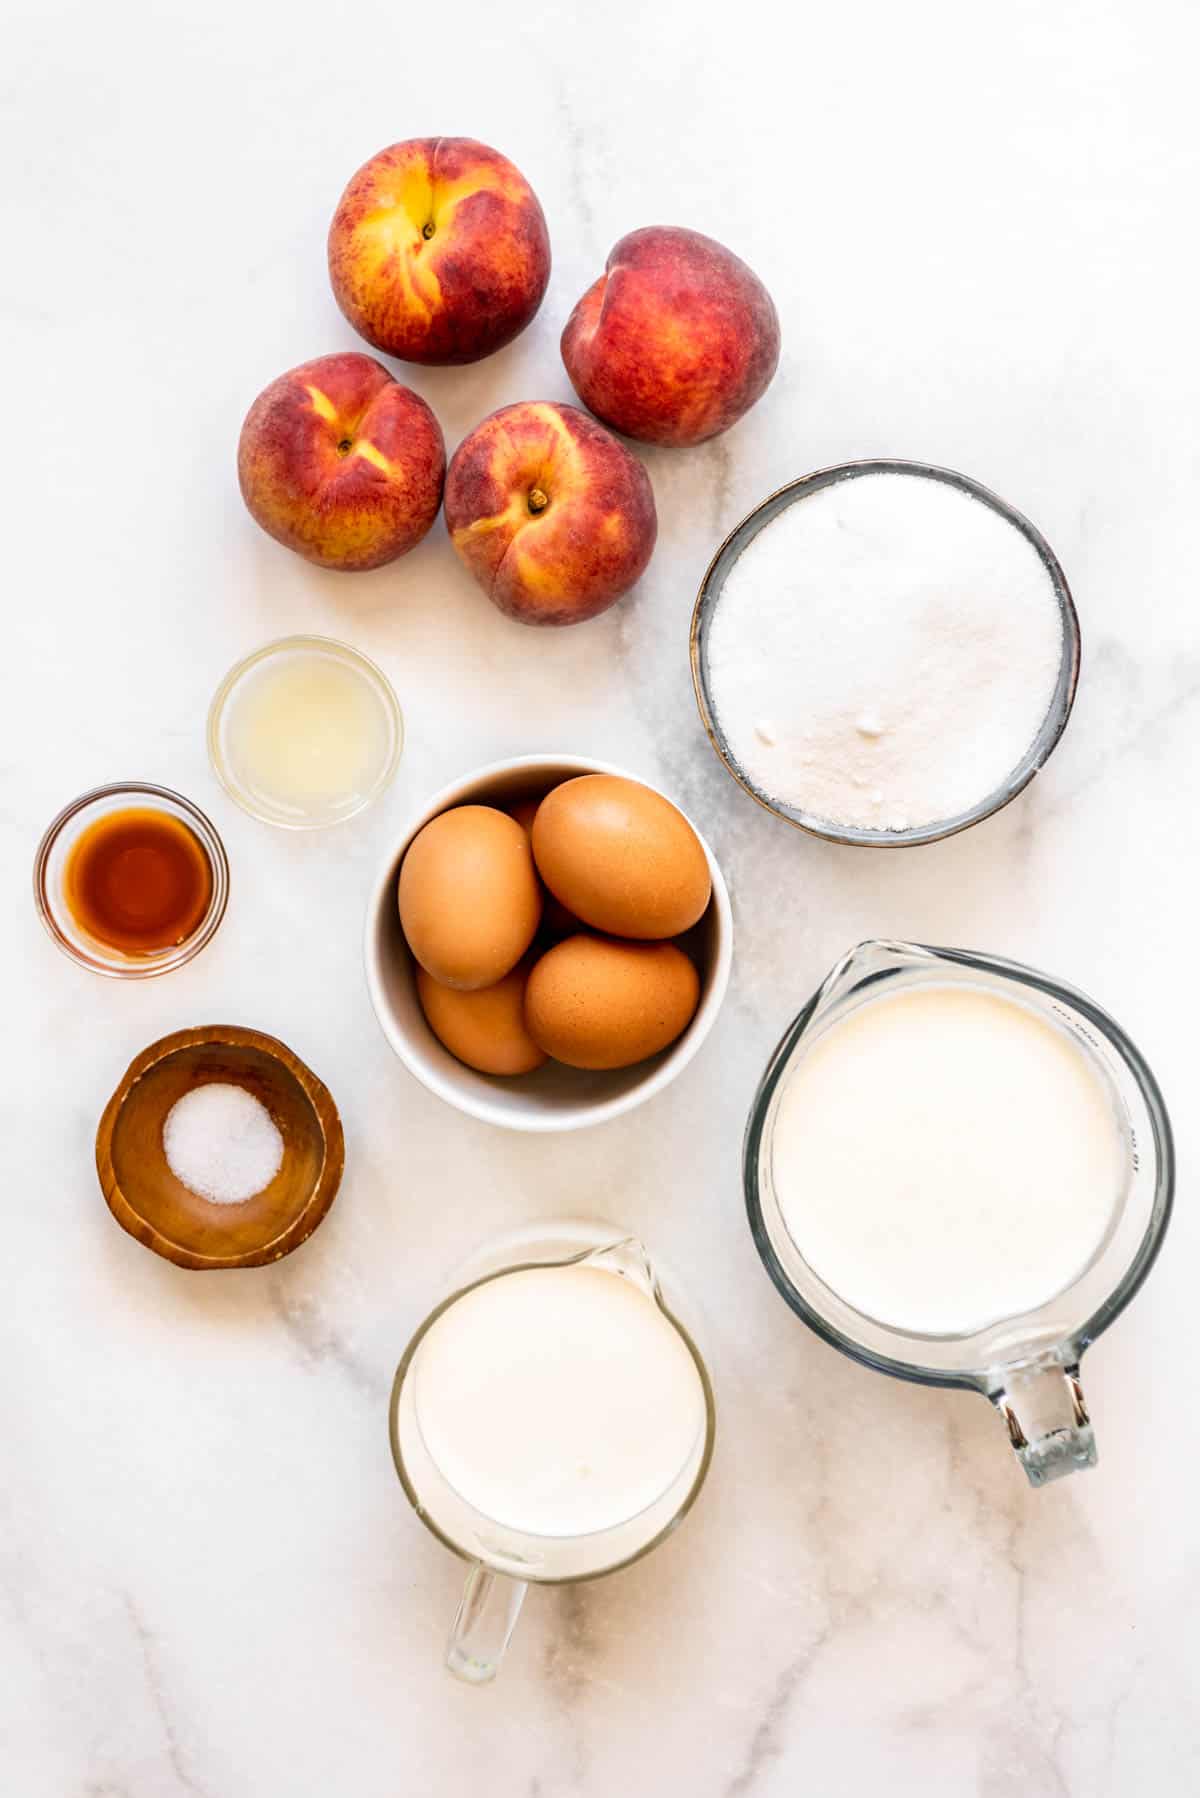 Ingredients for making homemade peach ice cream.